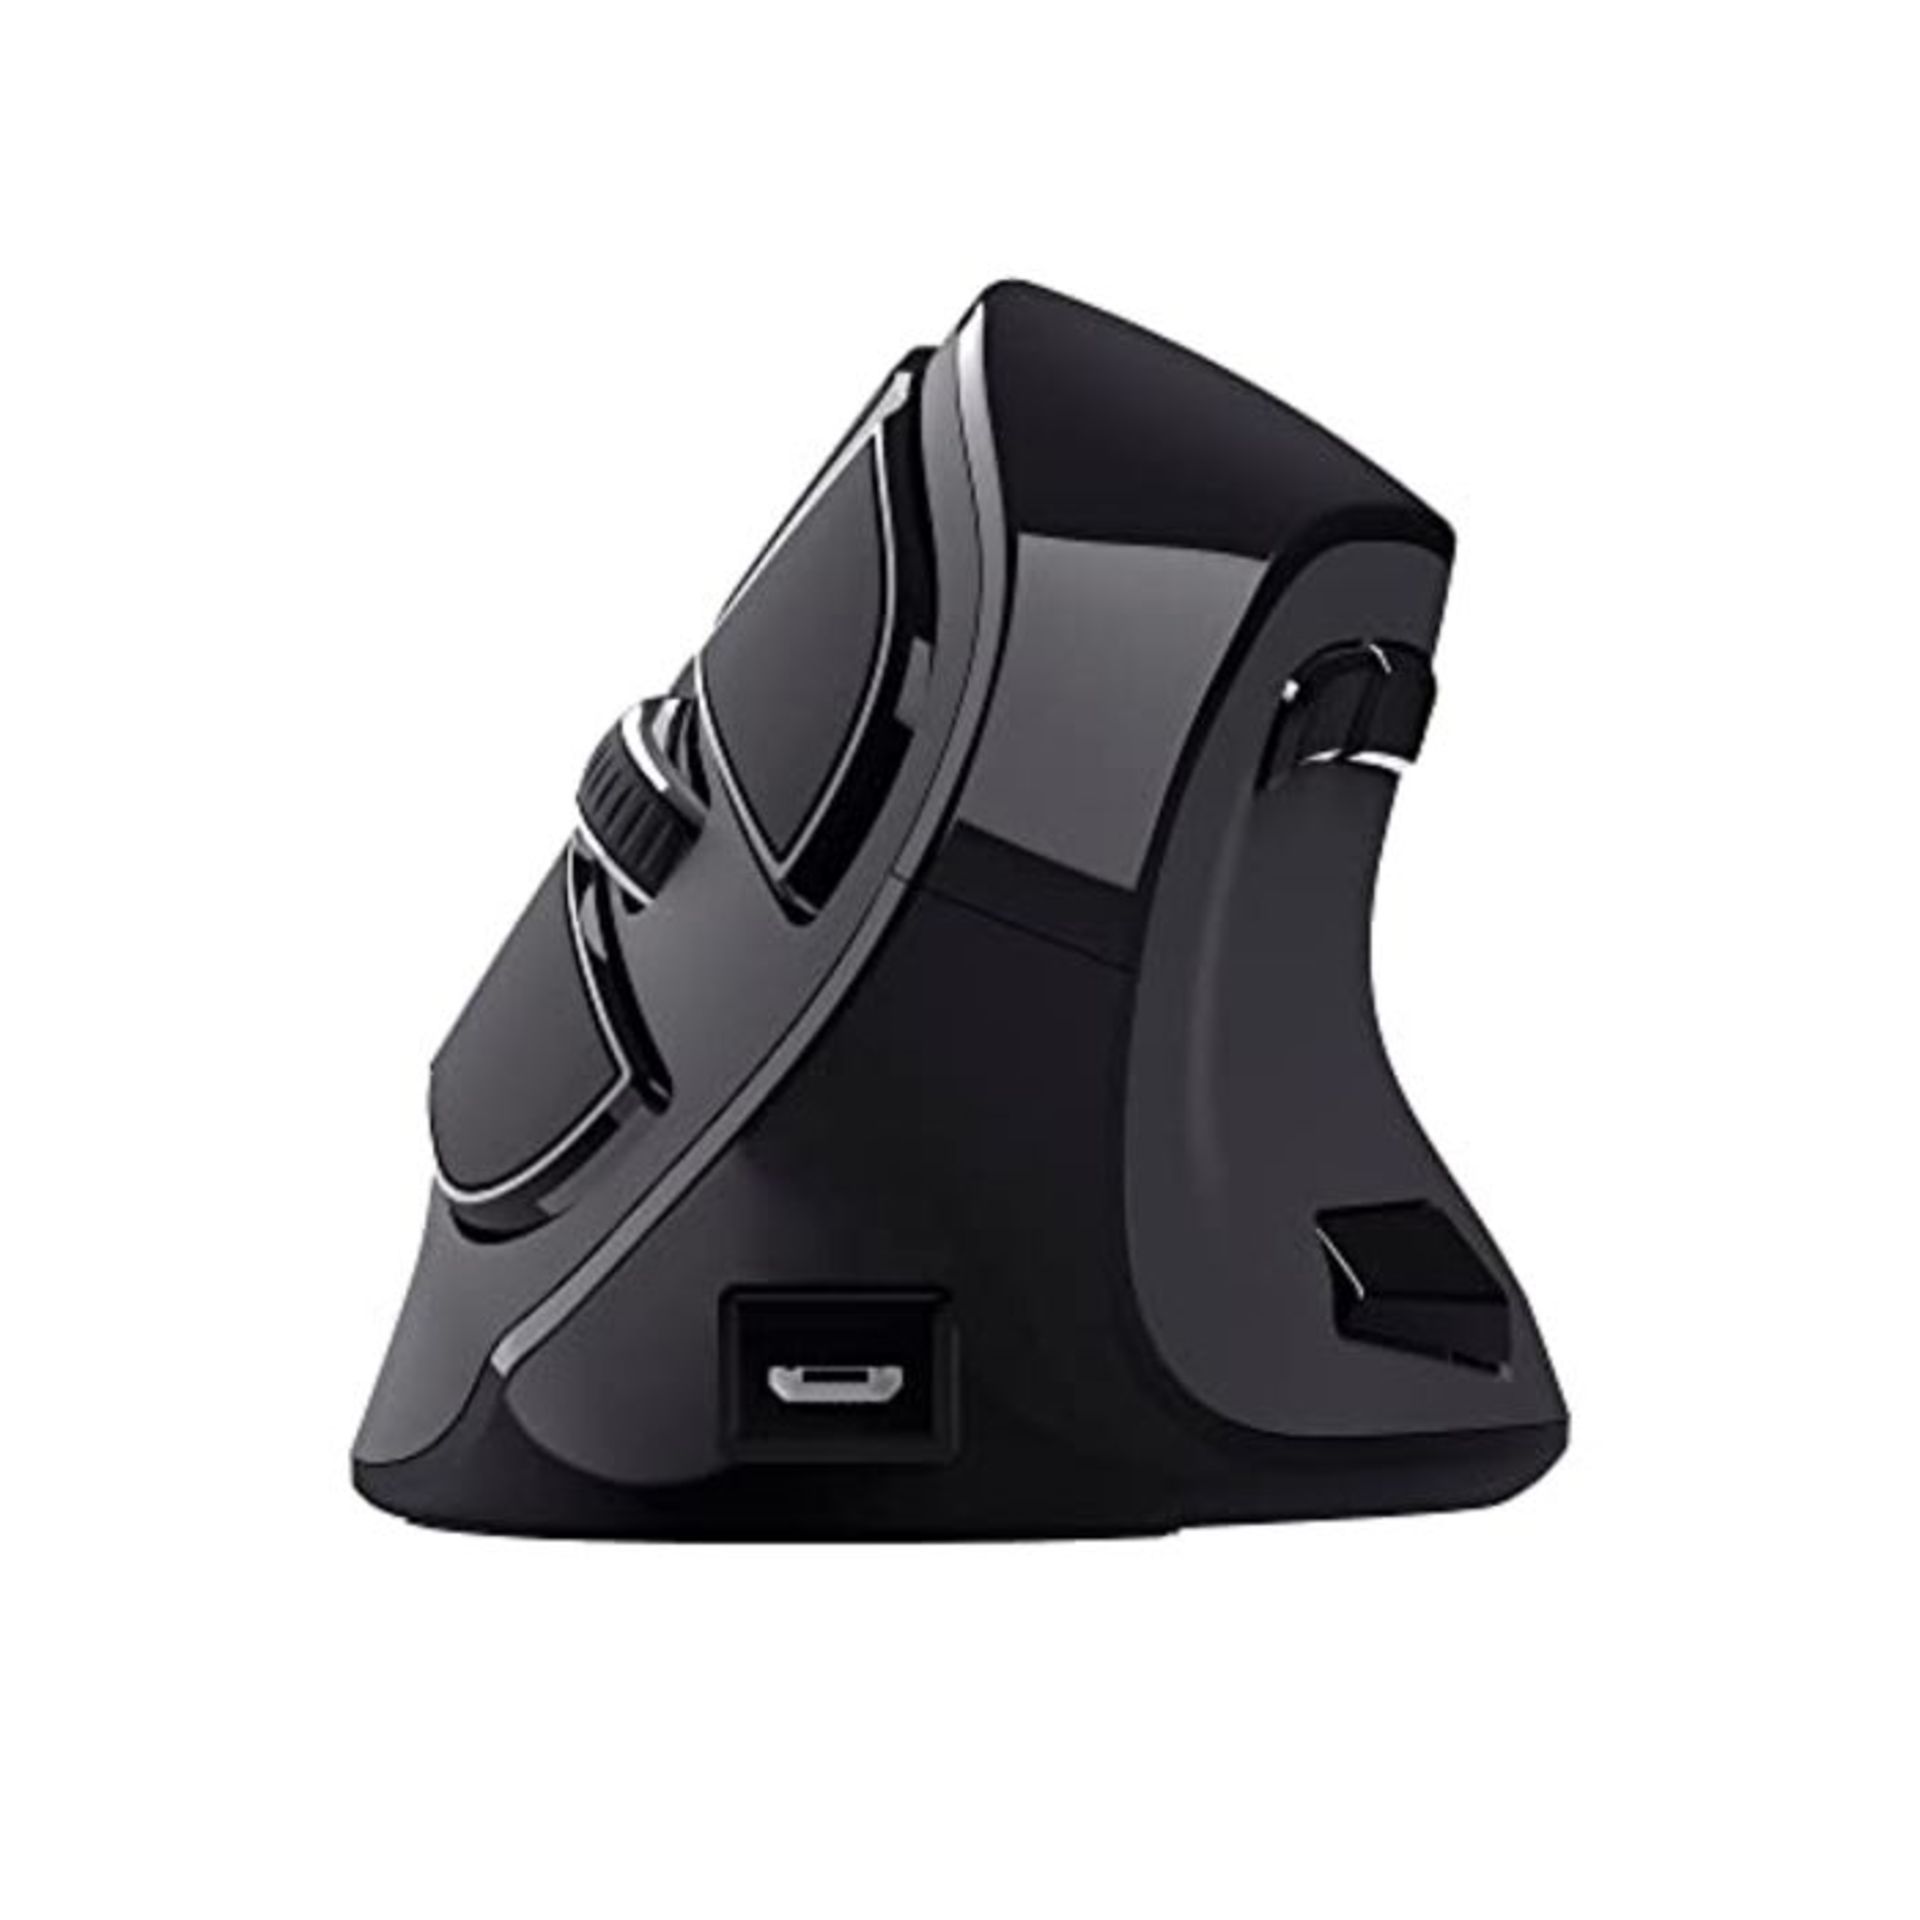 Trust Voxx Vertical Ergonomic Mouse, Rechargeable Wireless Mouse, Bluetooth or 2.4 GHz